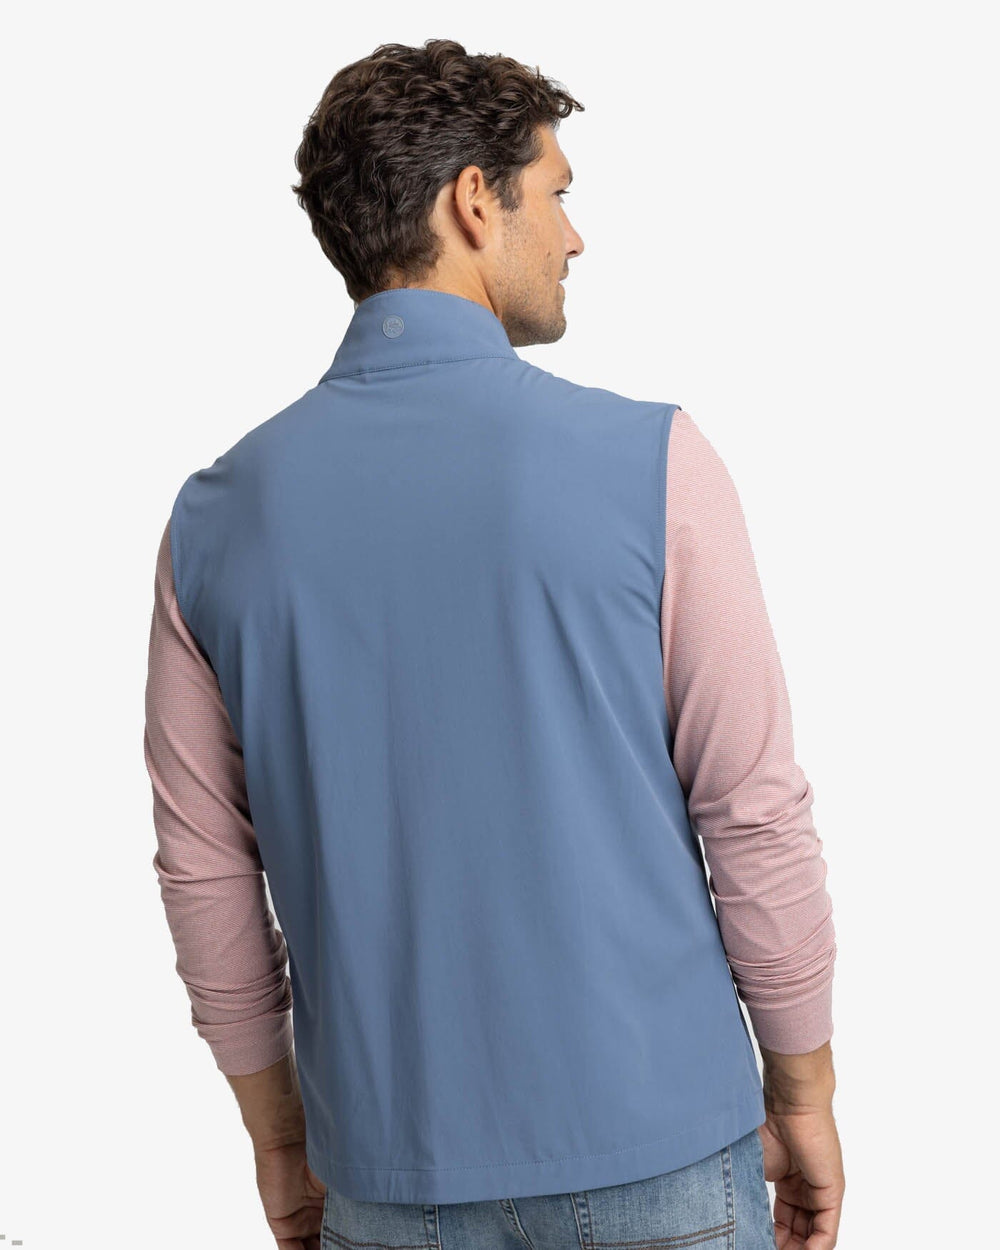 The back view of the Southern Tide Bowline Performance Vest by Southern Tide - Blue Haze